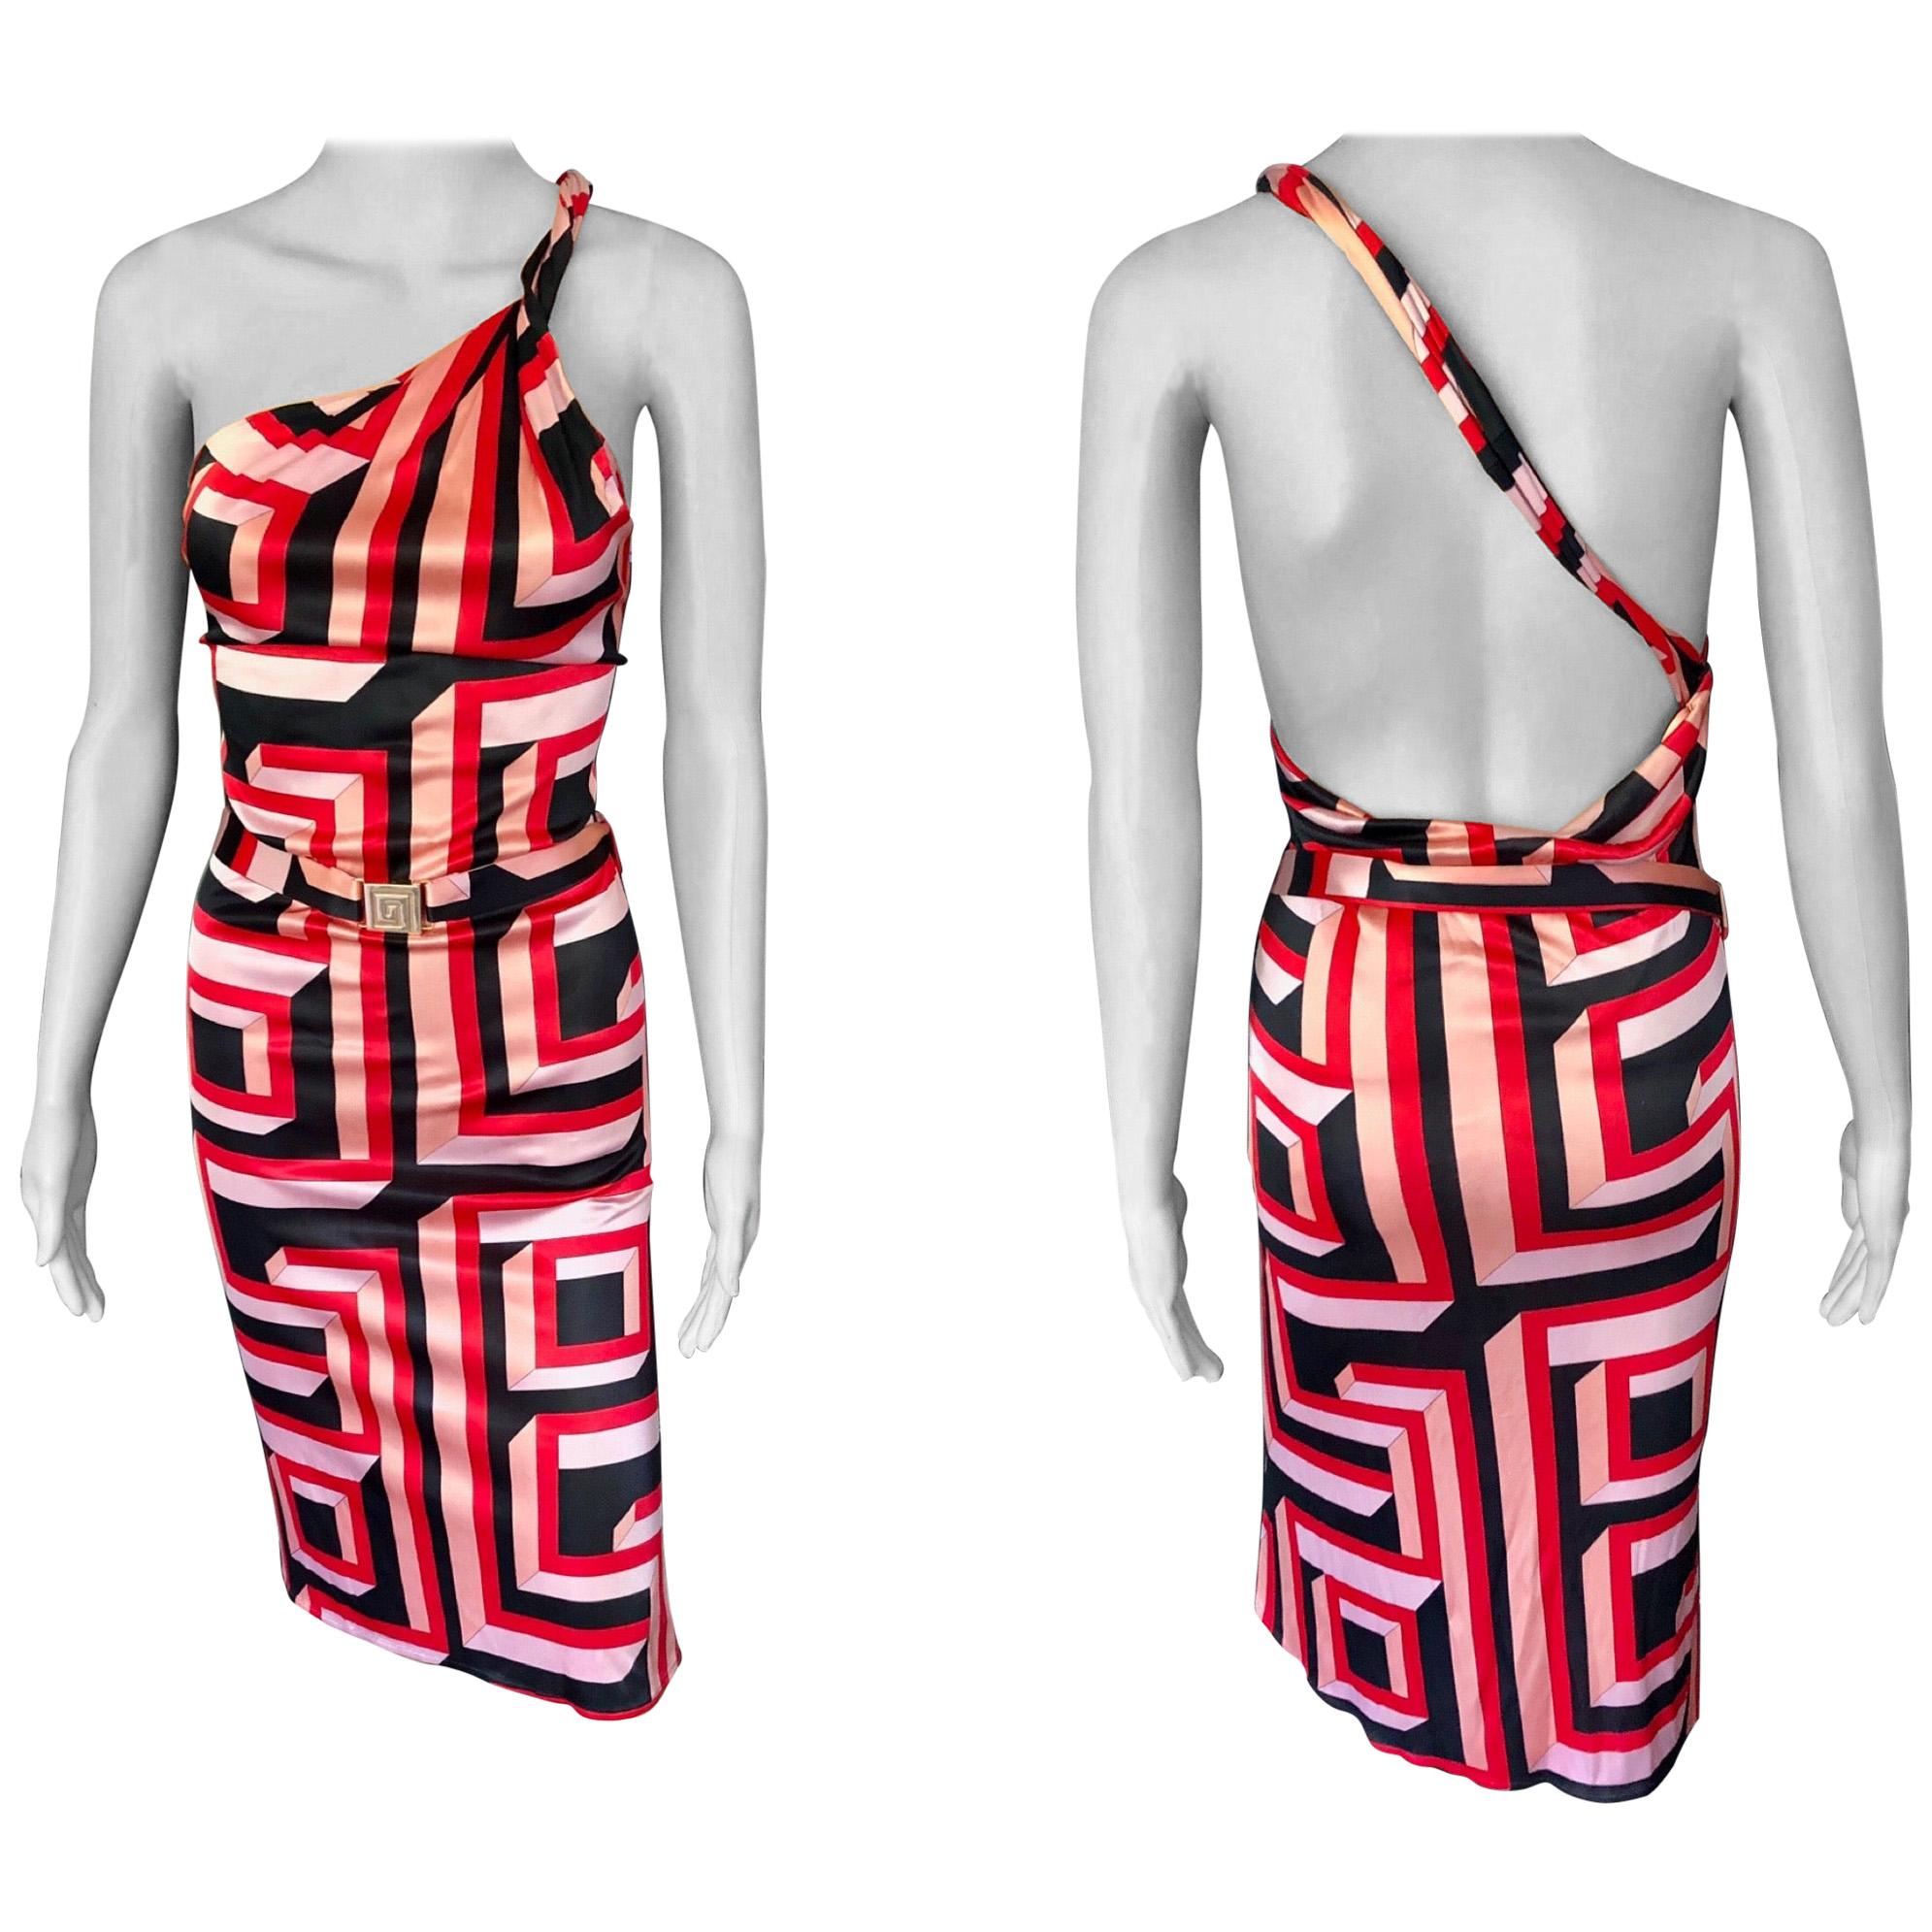 Gianni Versace S/S 2001 Vintage Geometric Print Belted Open Back Dress For Sale